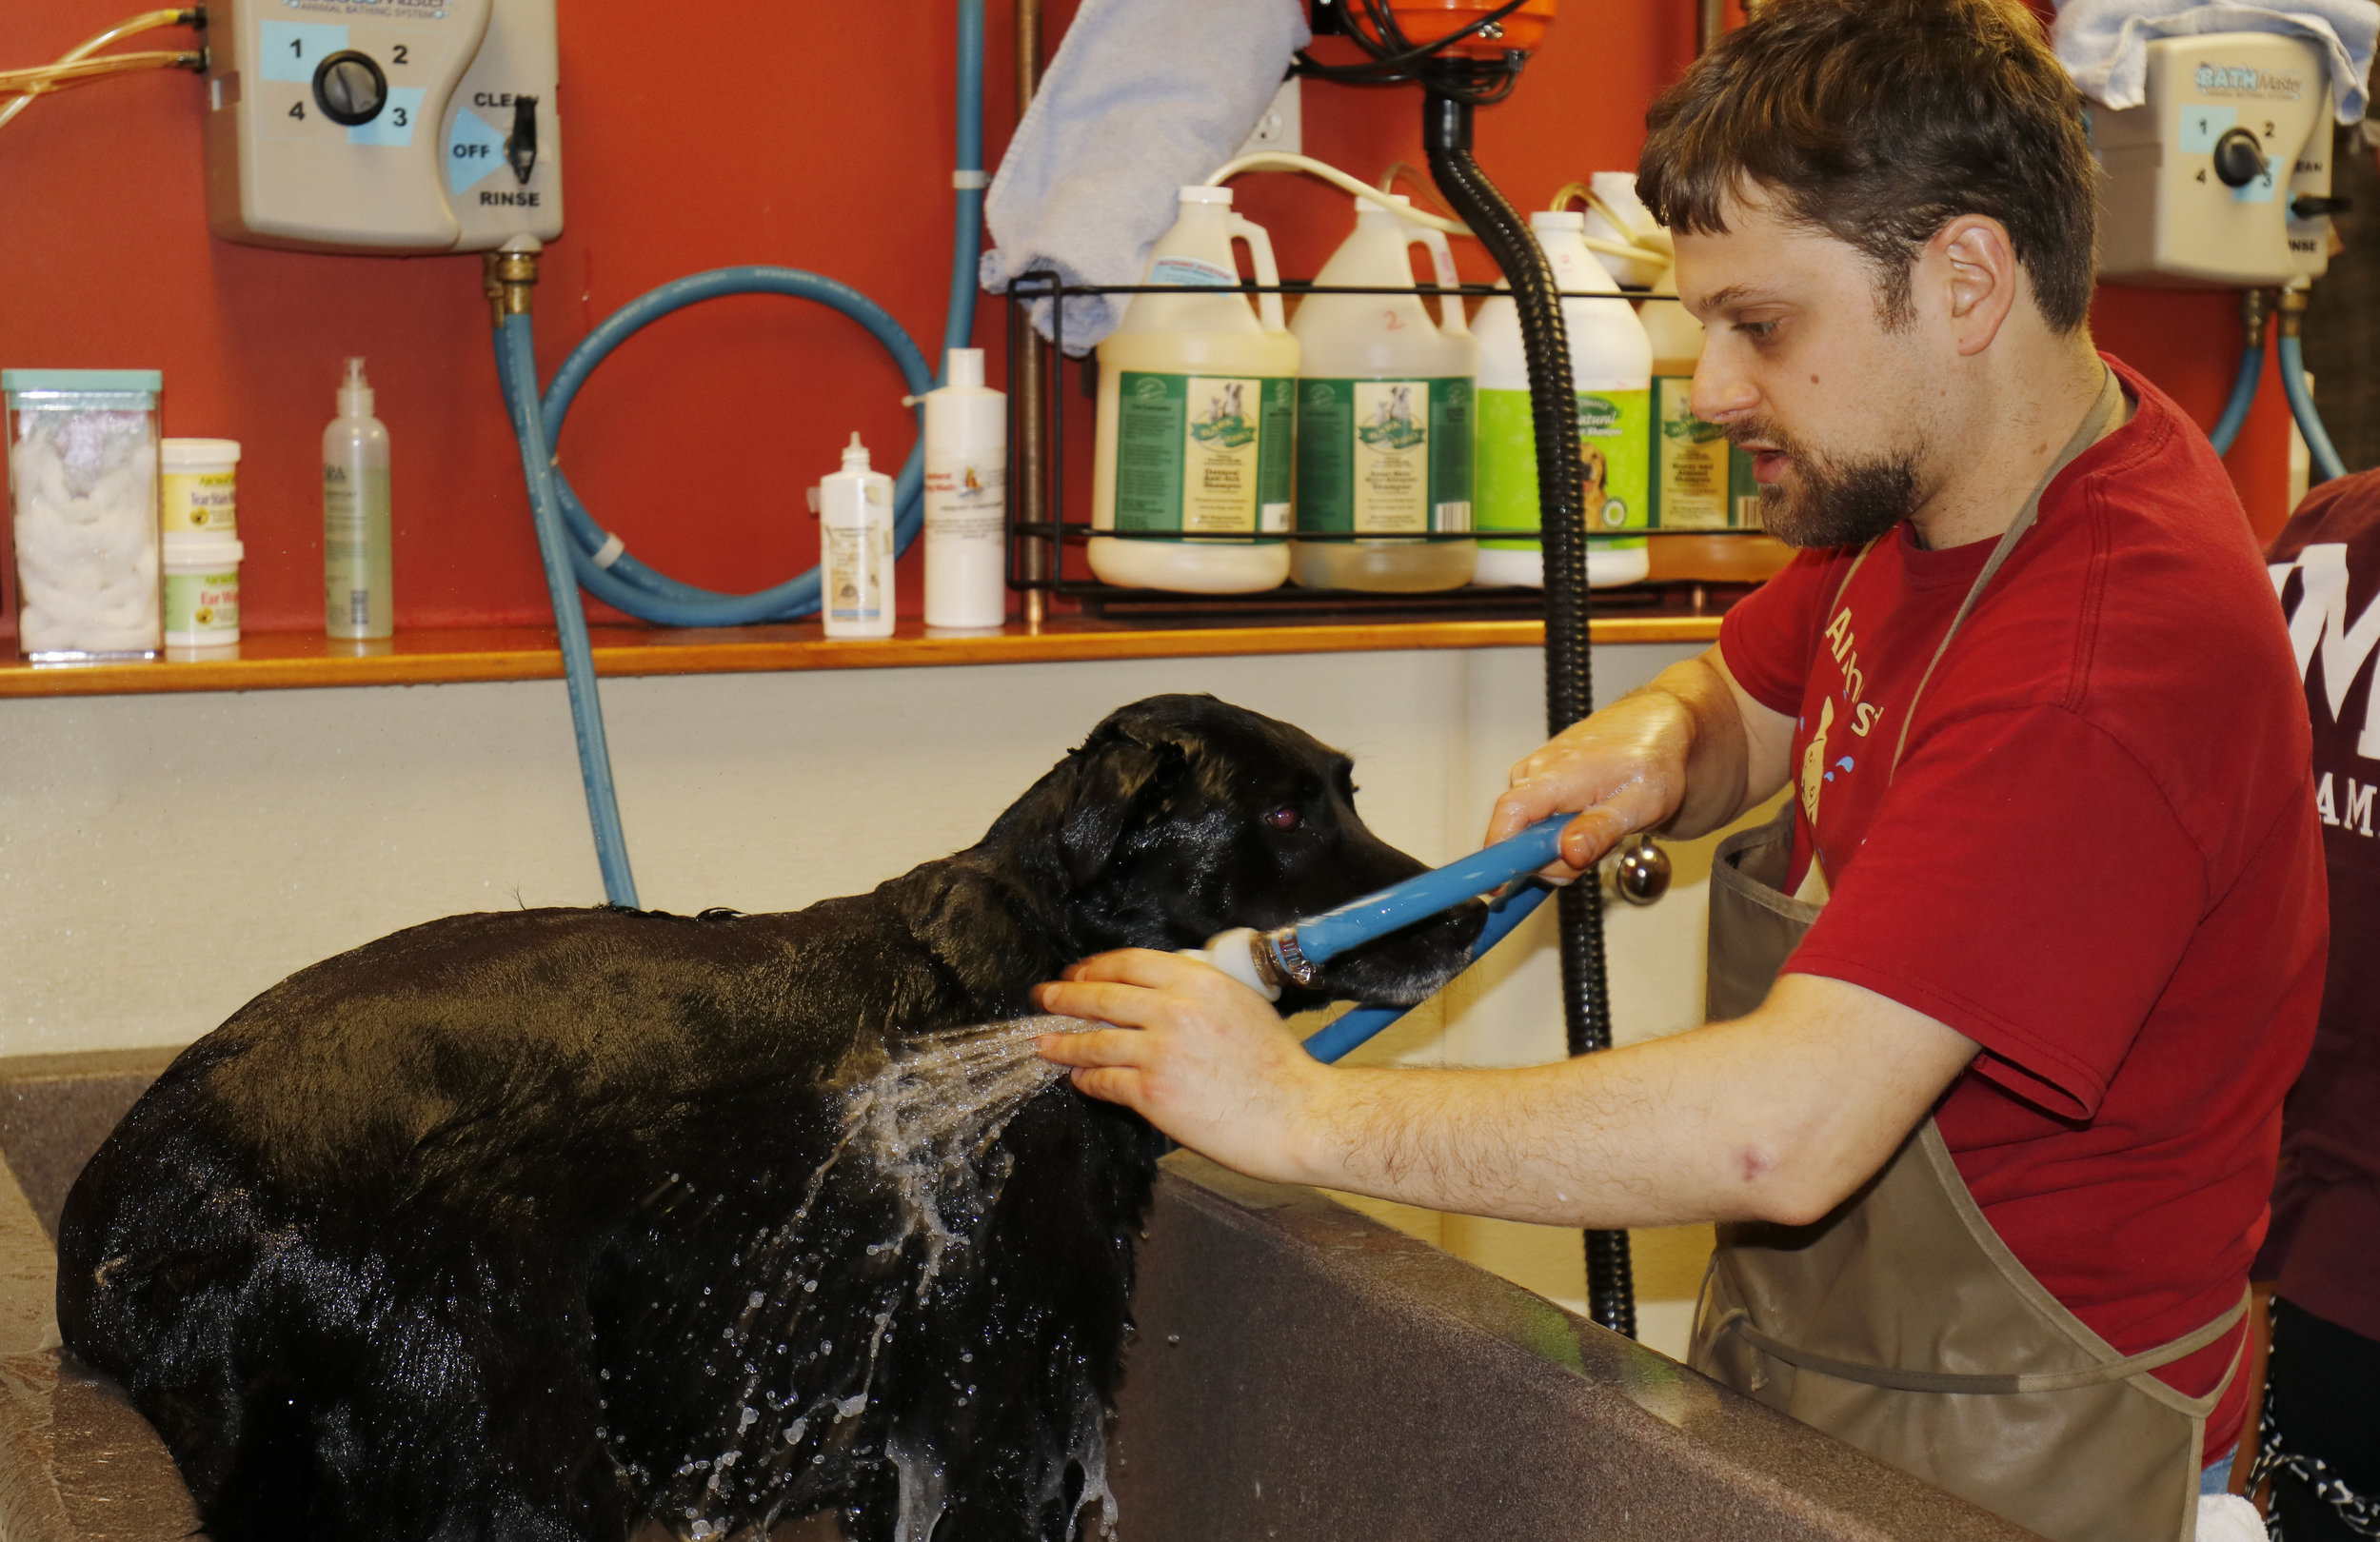   AMHERST DOG WASH AND GROOMING  